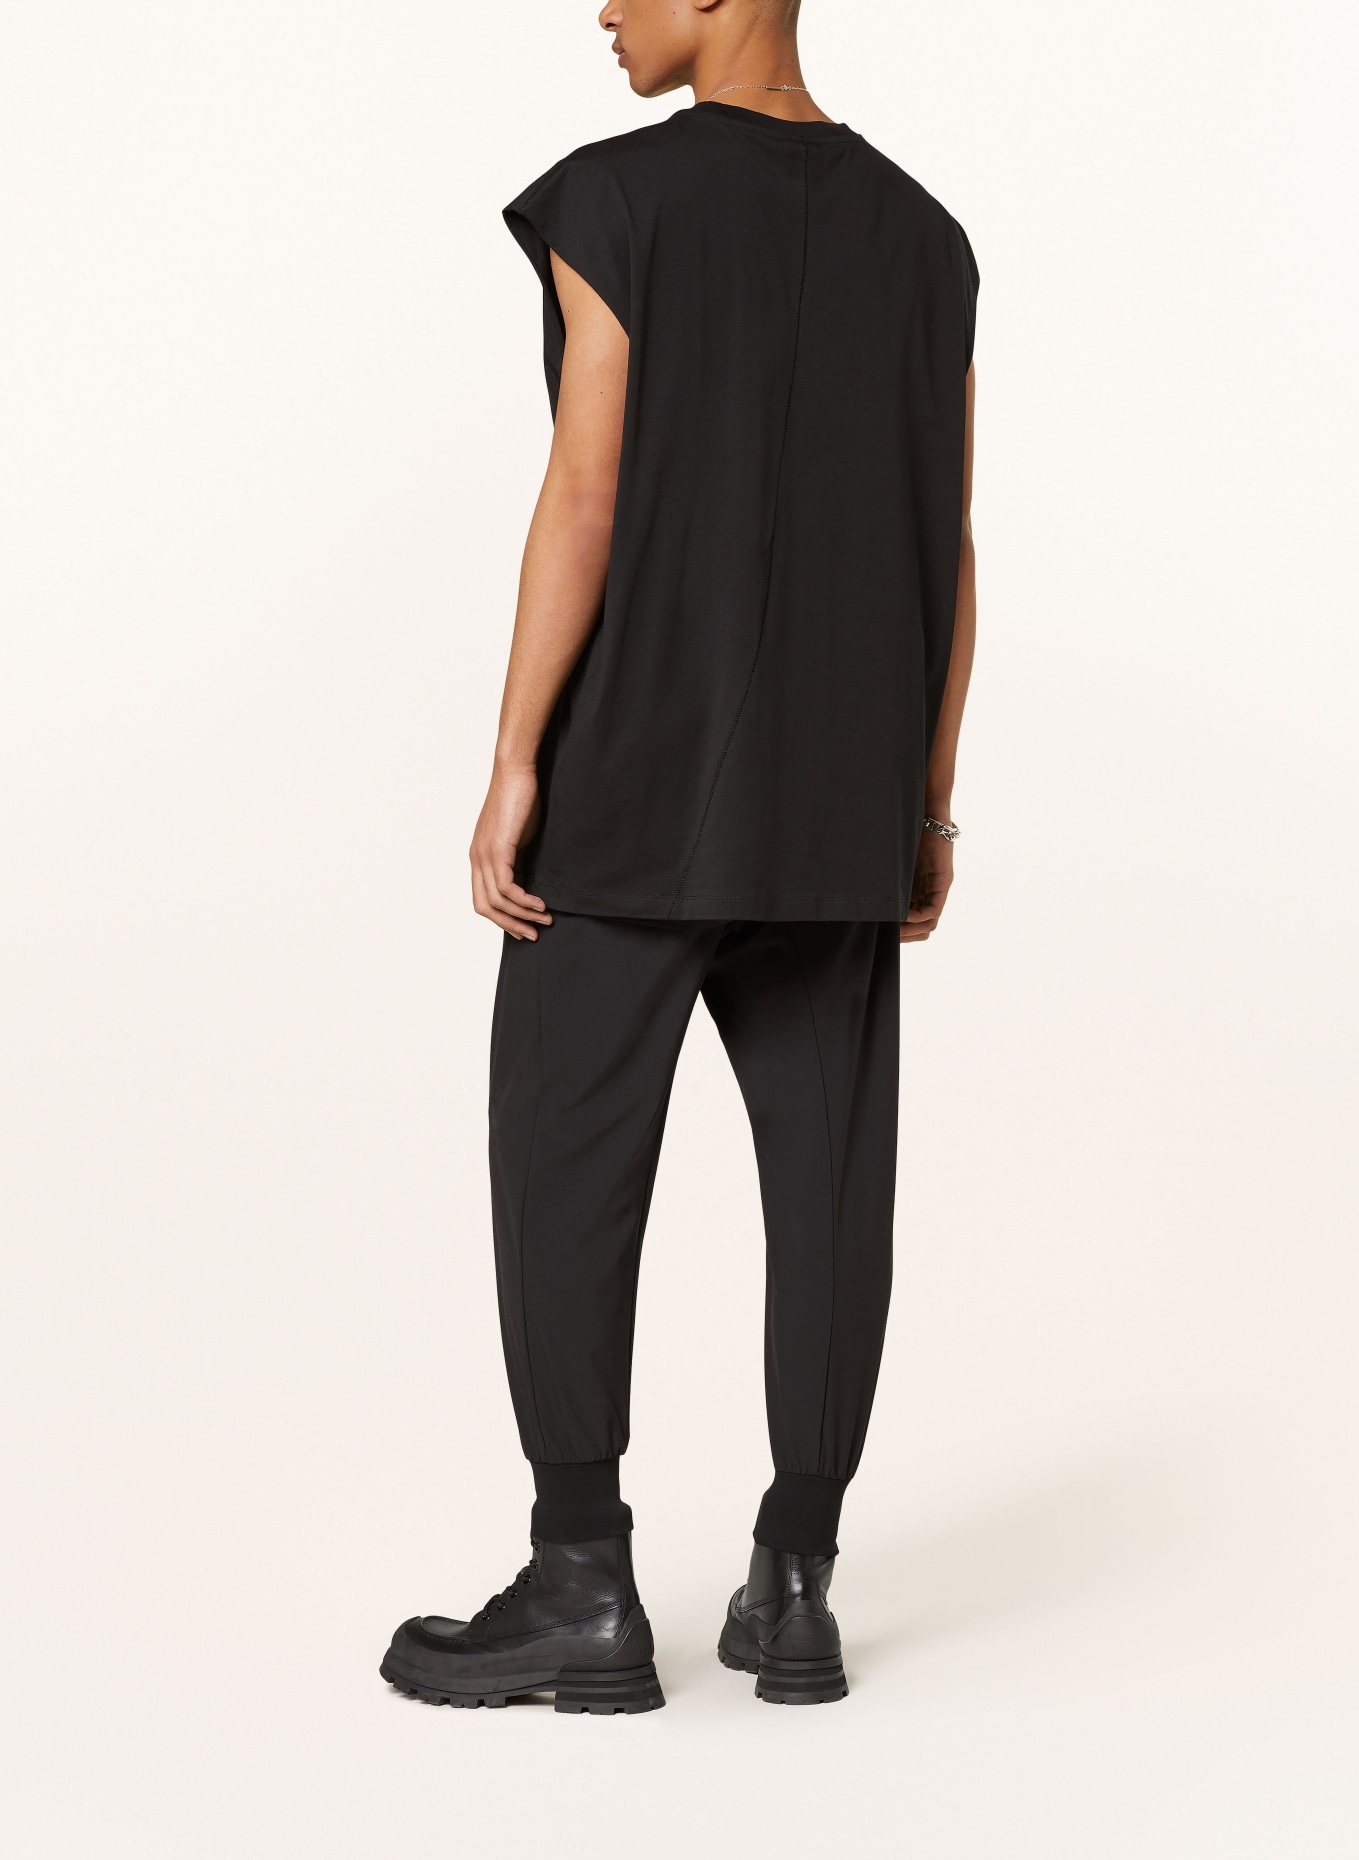 thom/krom Pants in jogger style, Color: BLACK (Image 3)